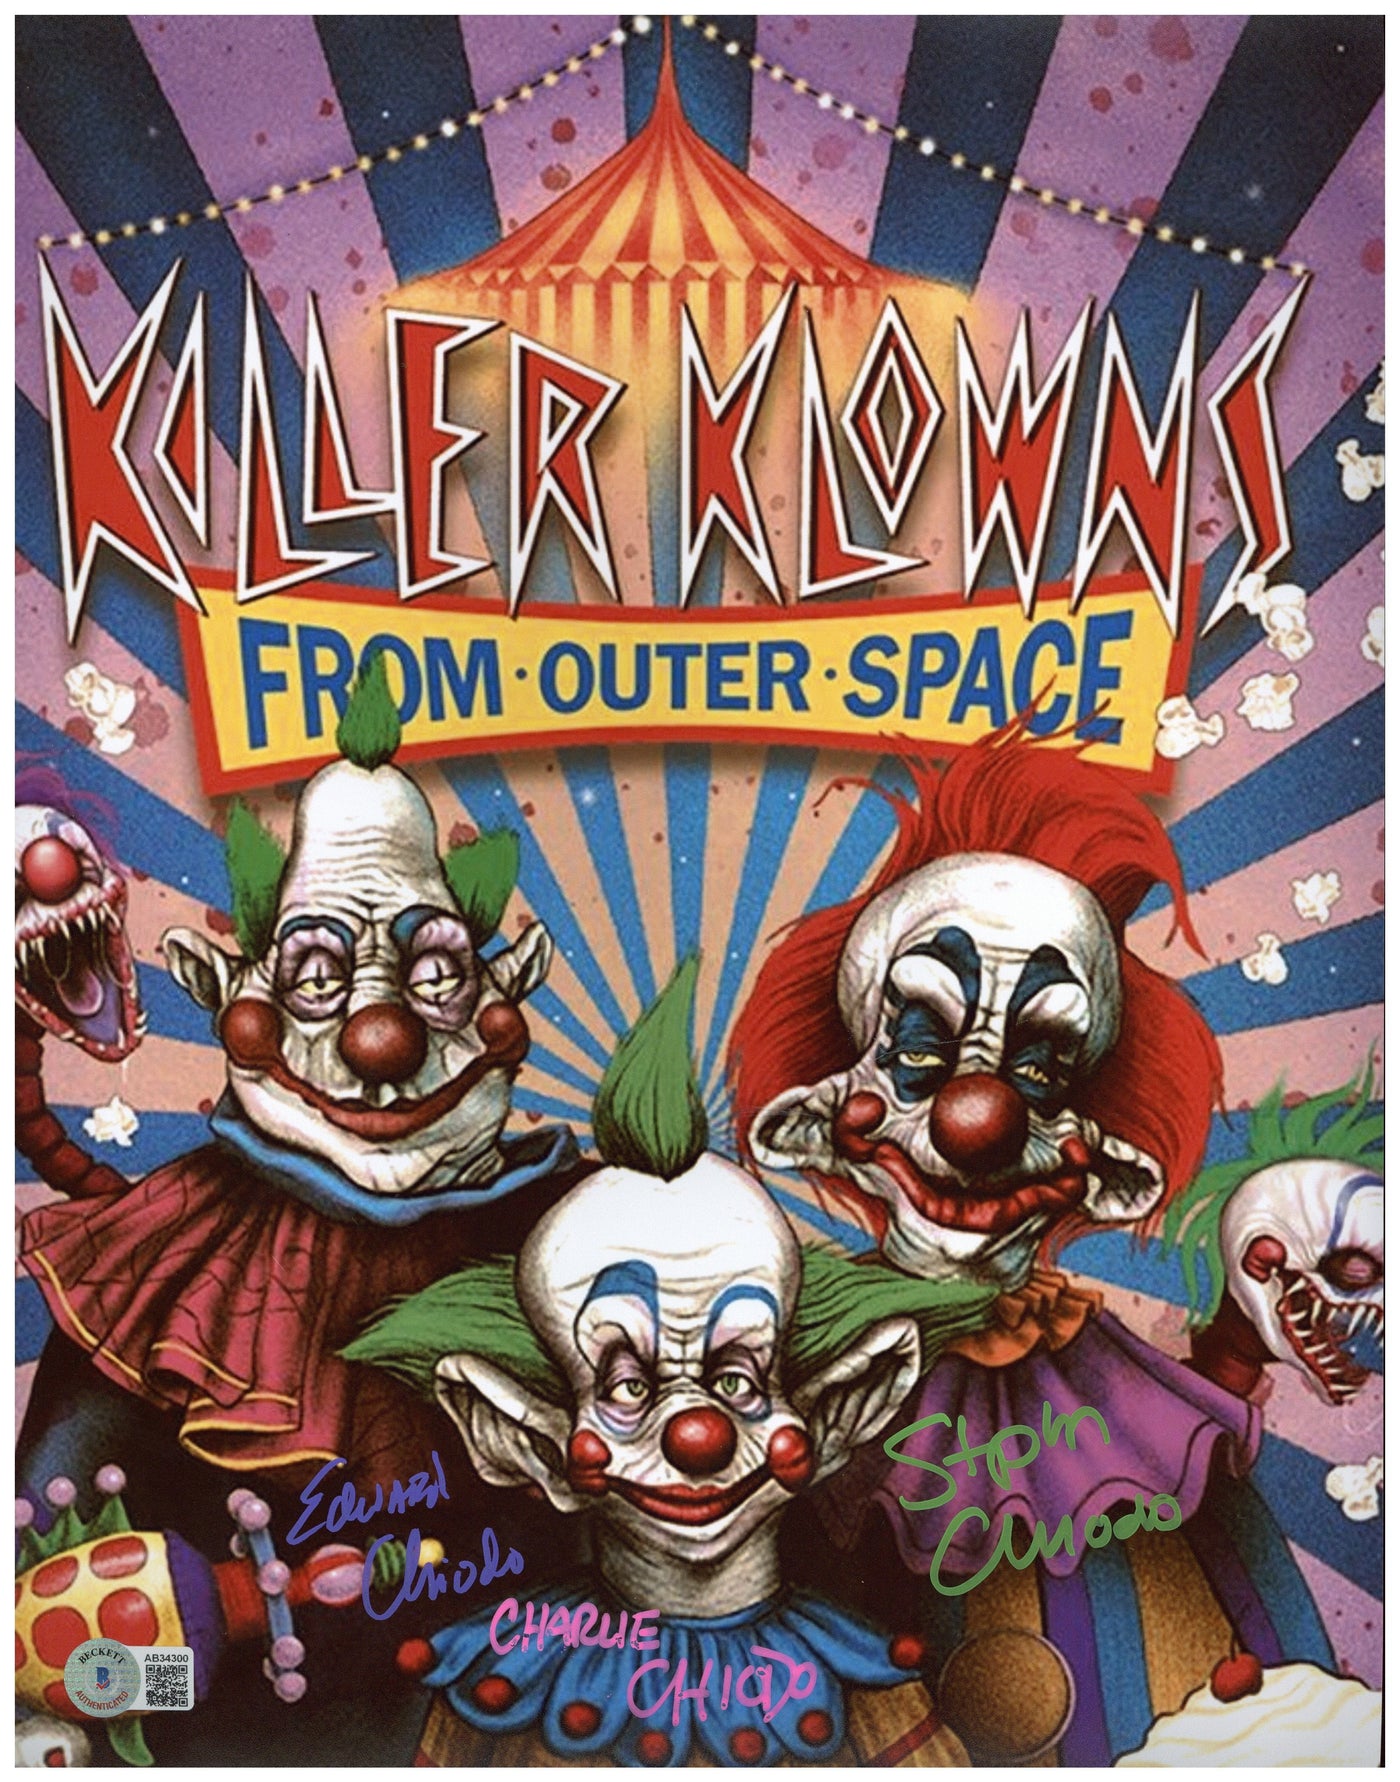 Killer Klowns From Outer Space Signed 11x14 Photo Chiodo Brothers Autographed BAS